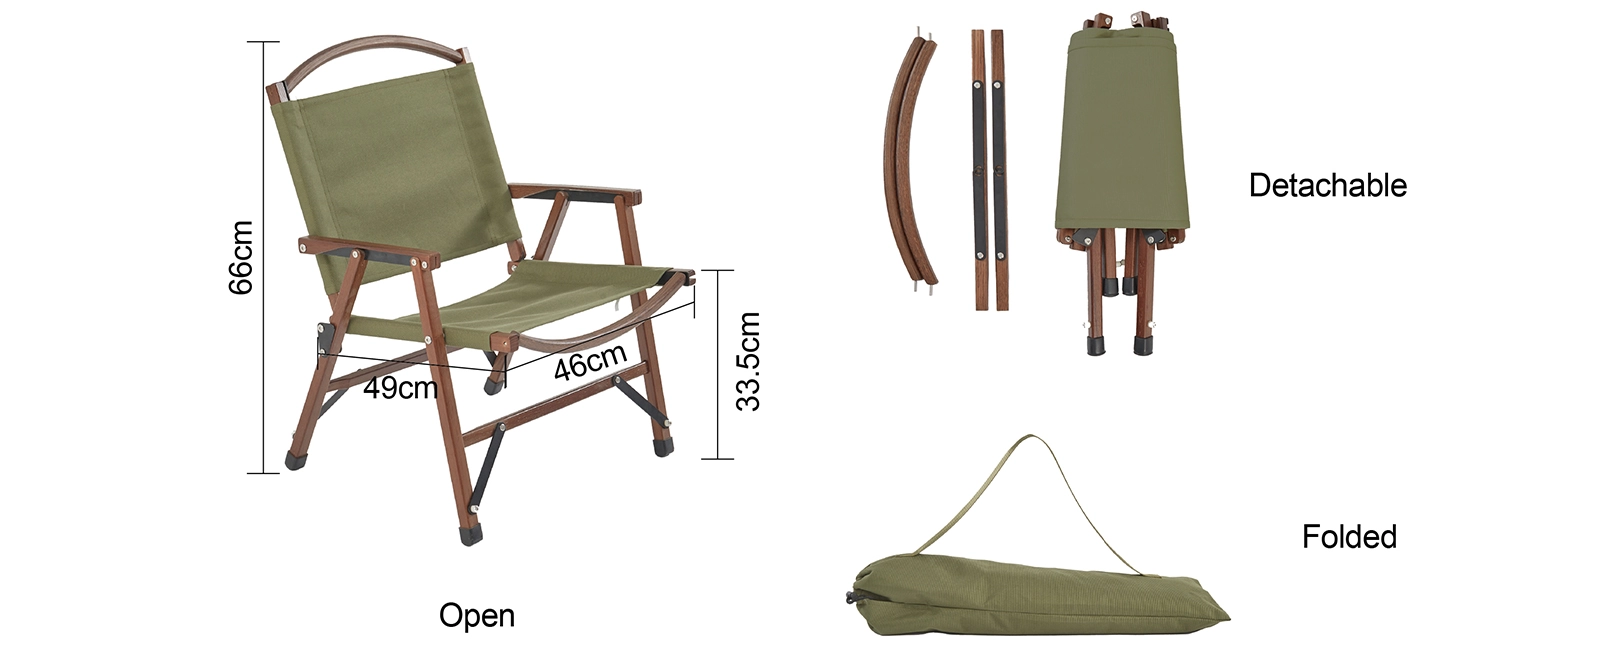 details of Outdoor Folding Furniture Backpacking Wood Chair